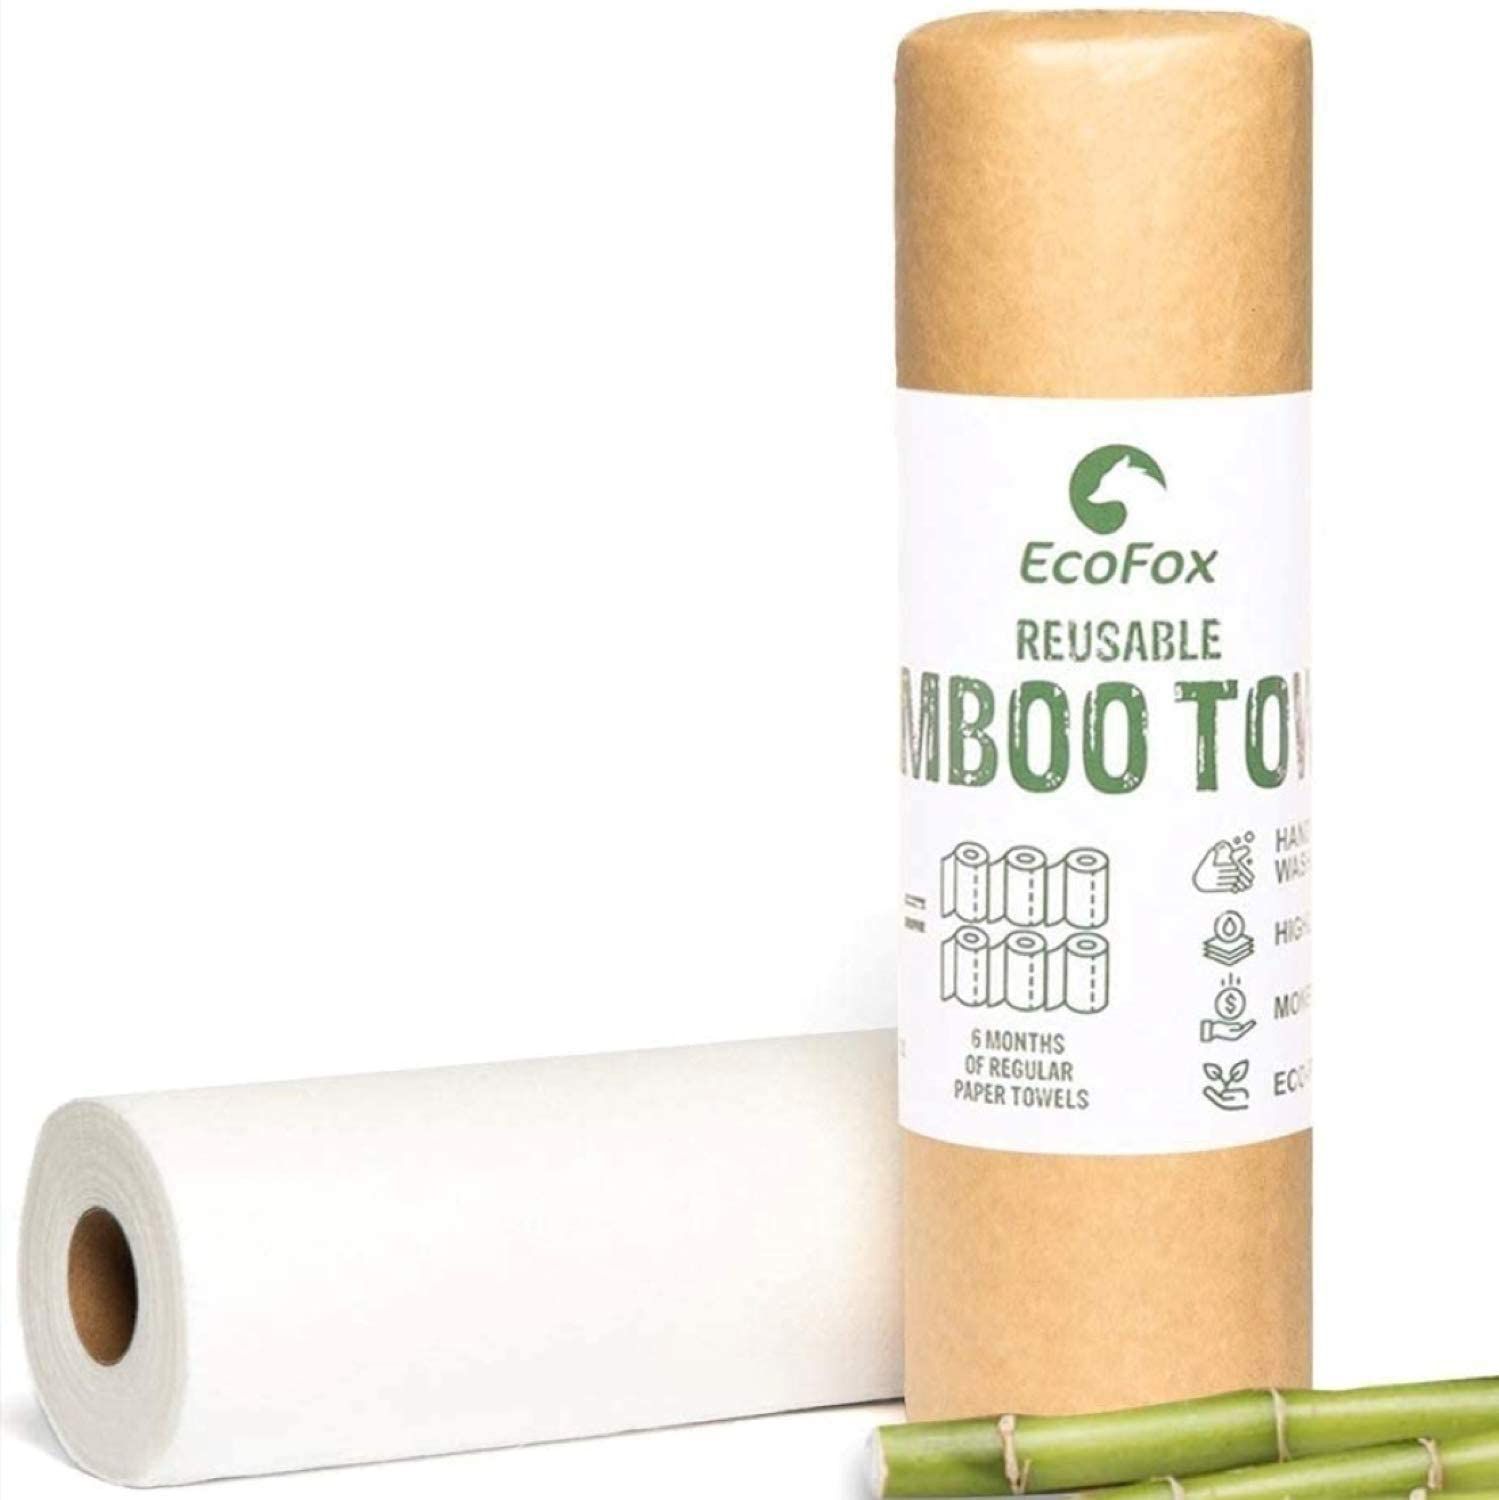 two rolls of reusable bamboo paper towels